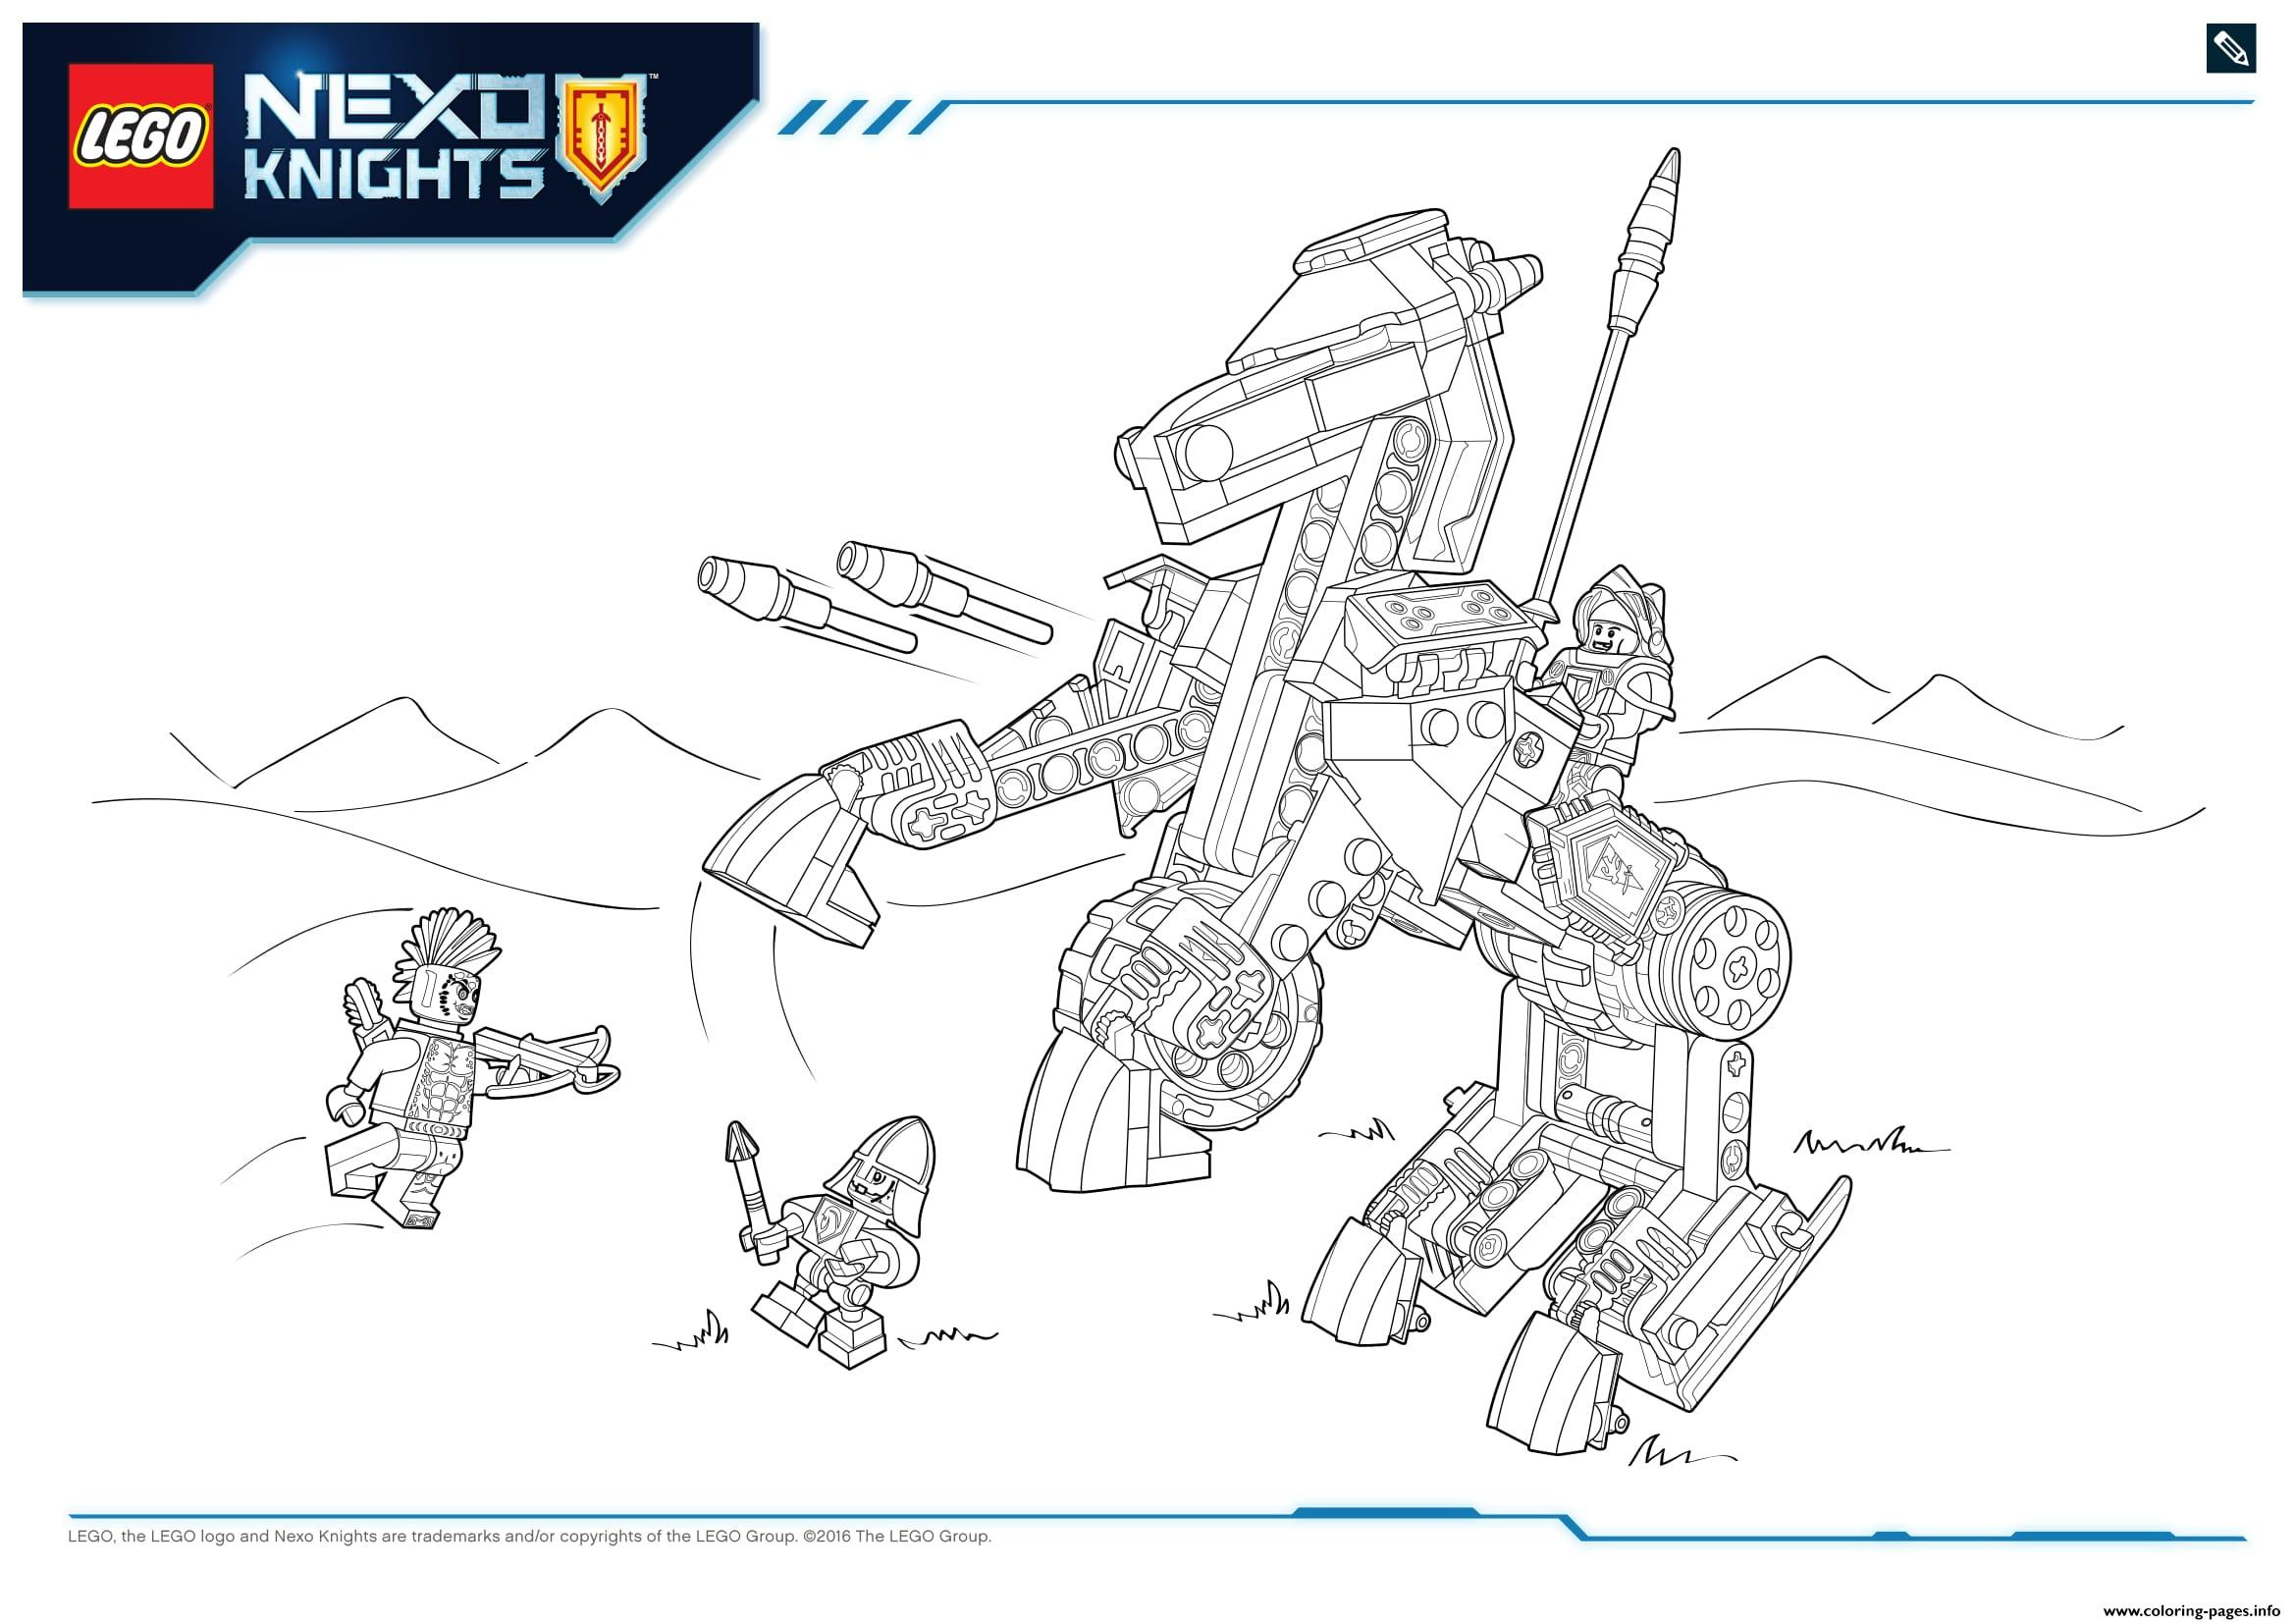 lego nexo knights products 6 printable coloring pages book